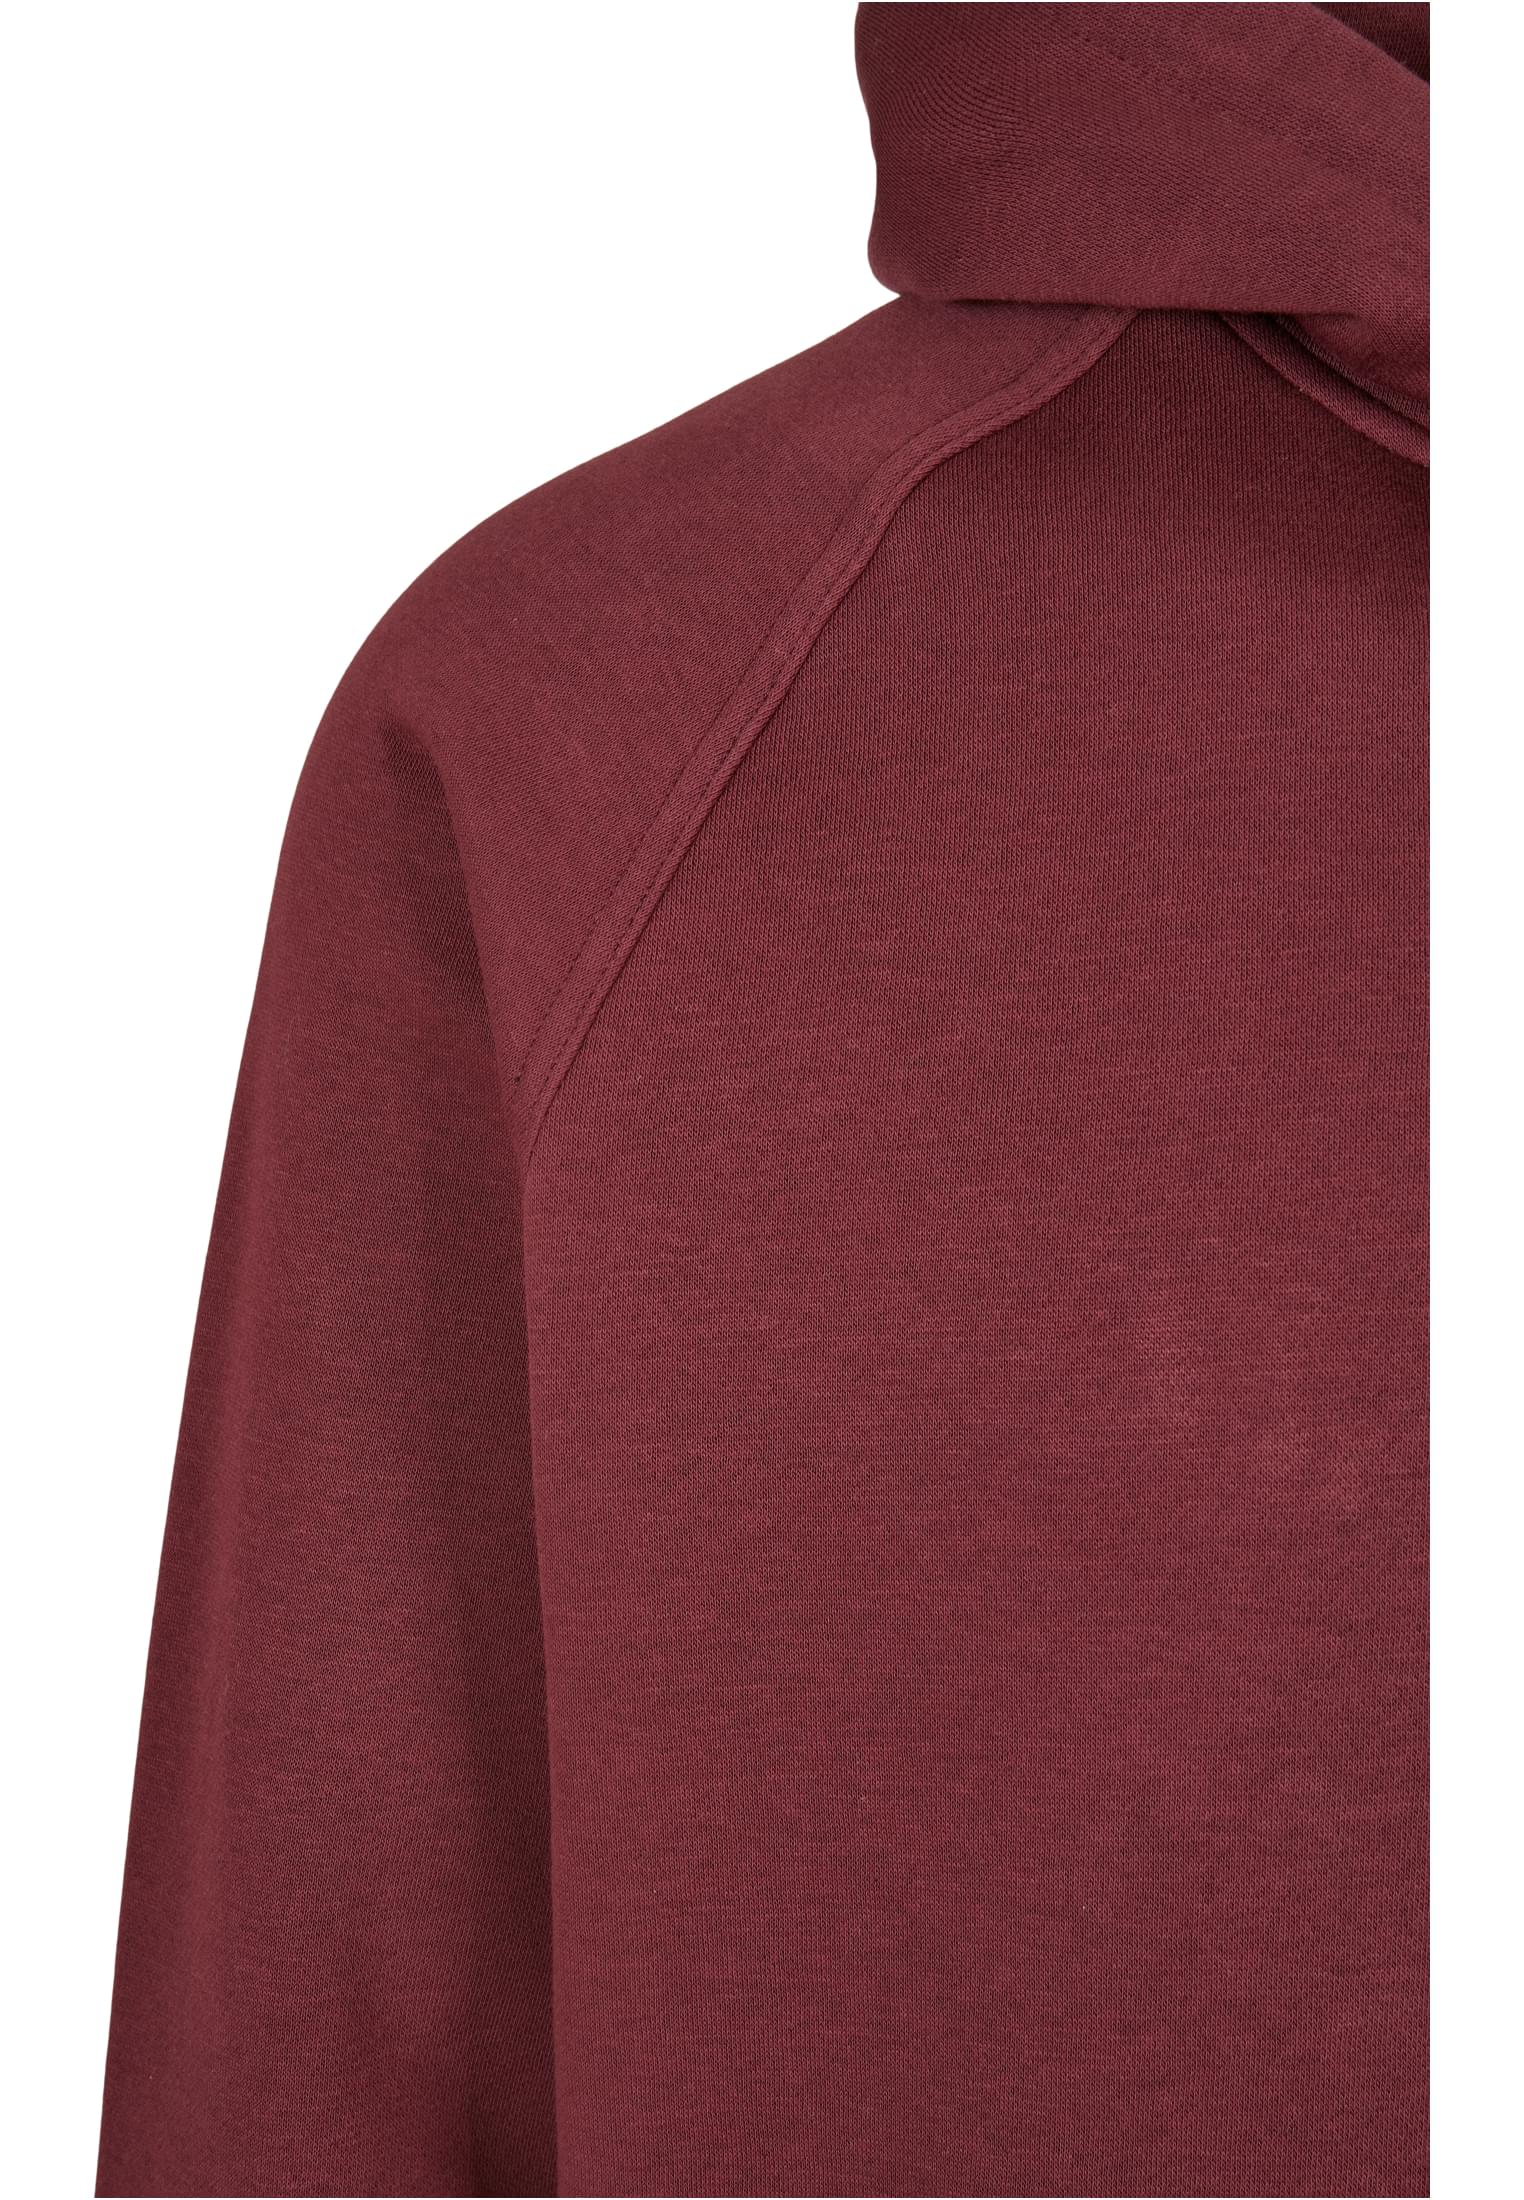 Plus Size Blank Hoody in Farbe cherry